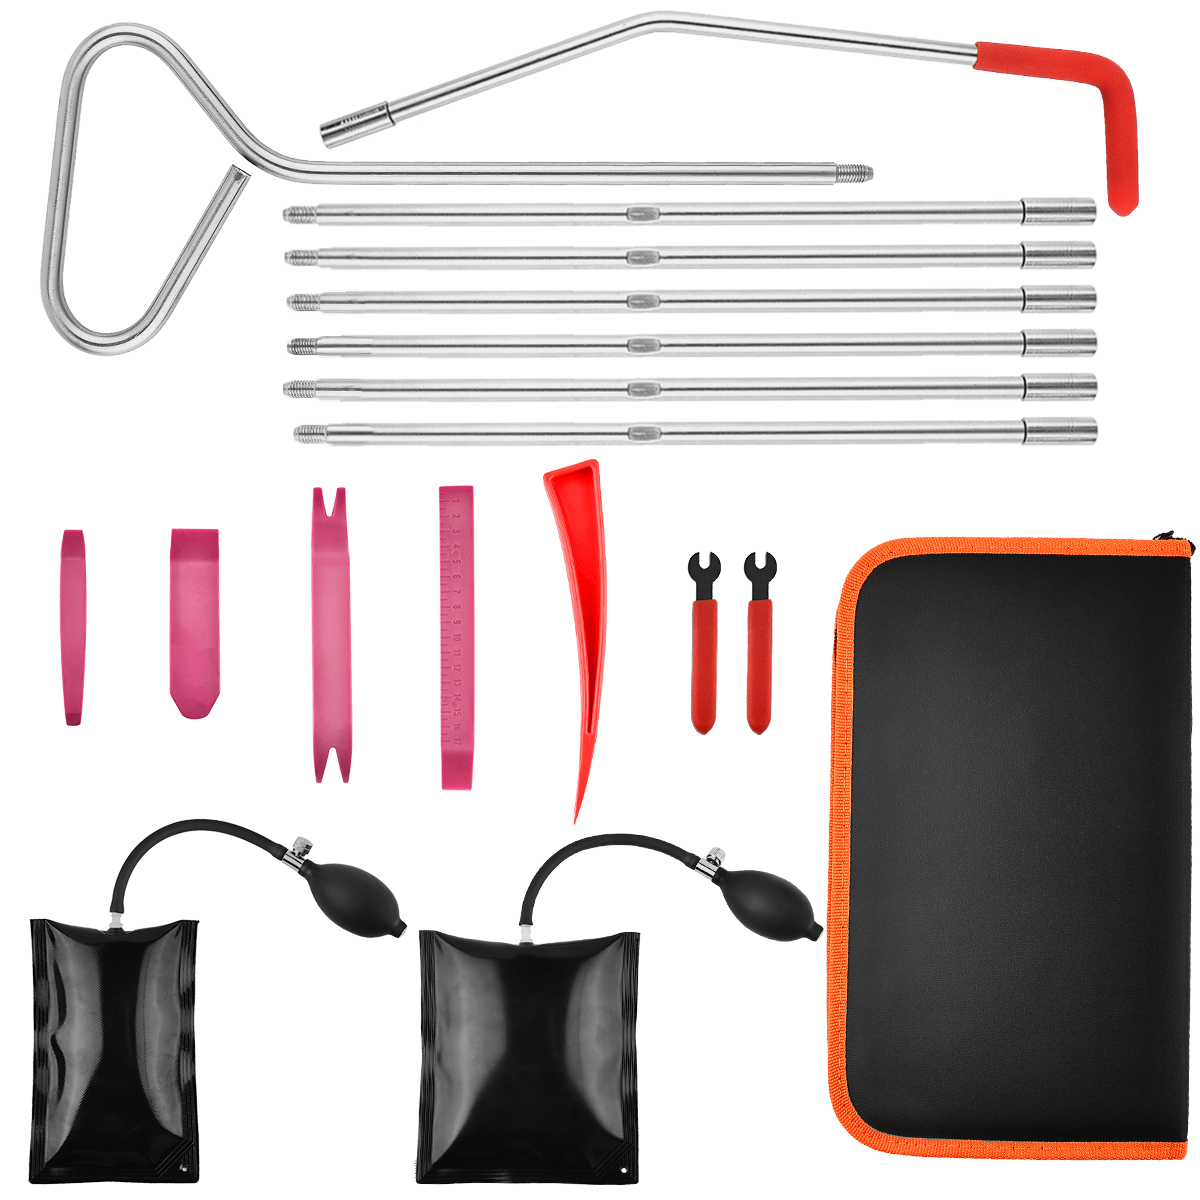 Car Tool Kit 17pcs, GOXAWEE Professional Essential Automotive Tool Set with Non Marring Wedge, Stainless Steel Long Reach Grabber, Air Wedge Pump, for Car Trucks Vehicle